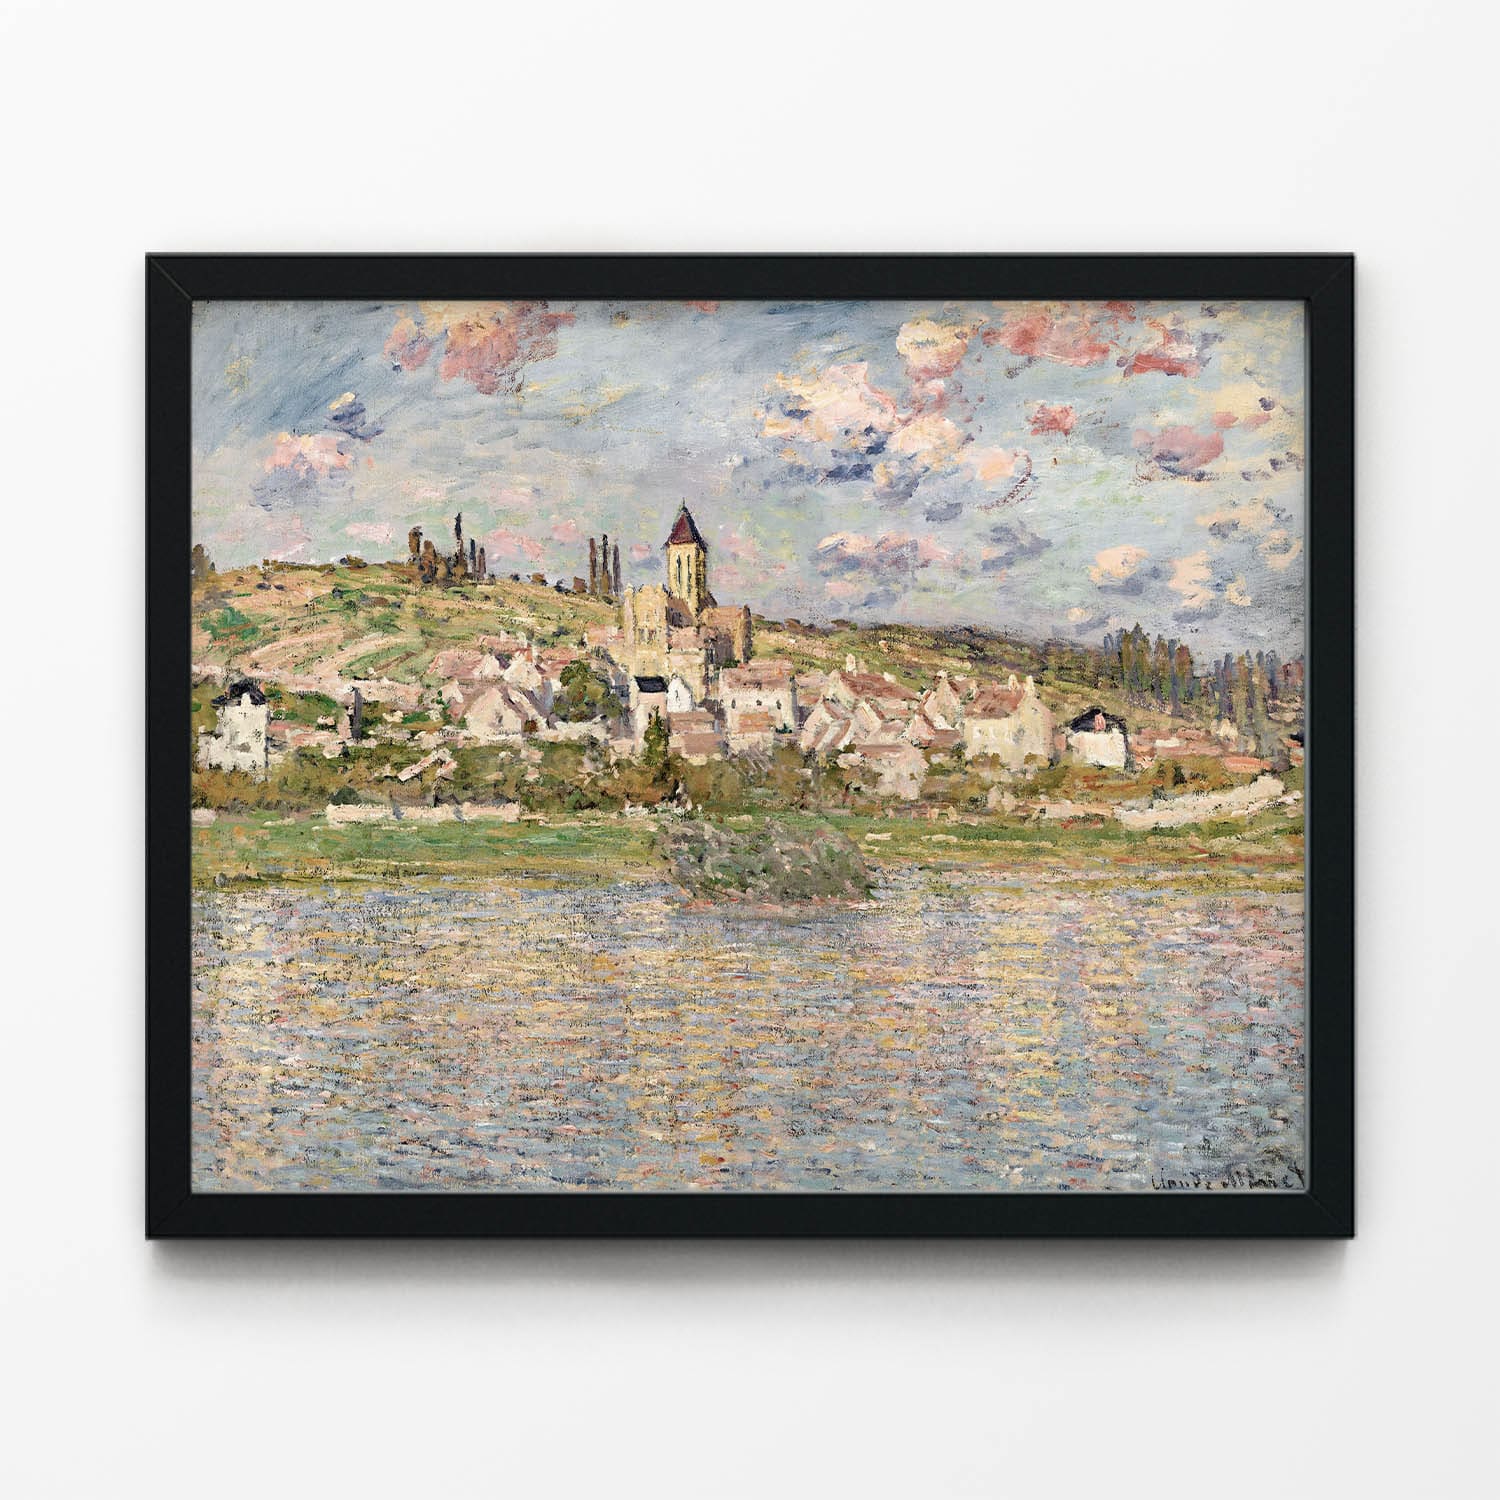 Seine River Painting in Black Picture Frame